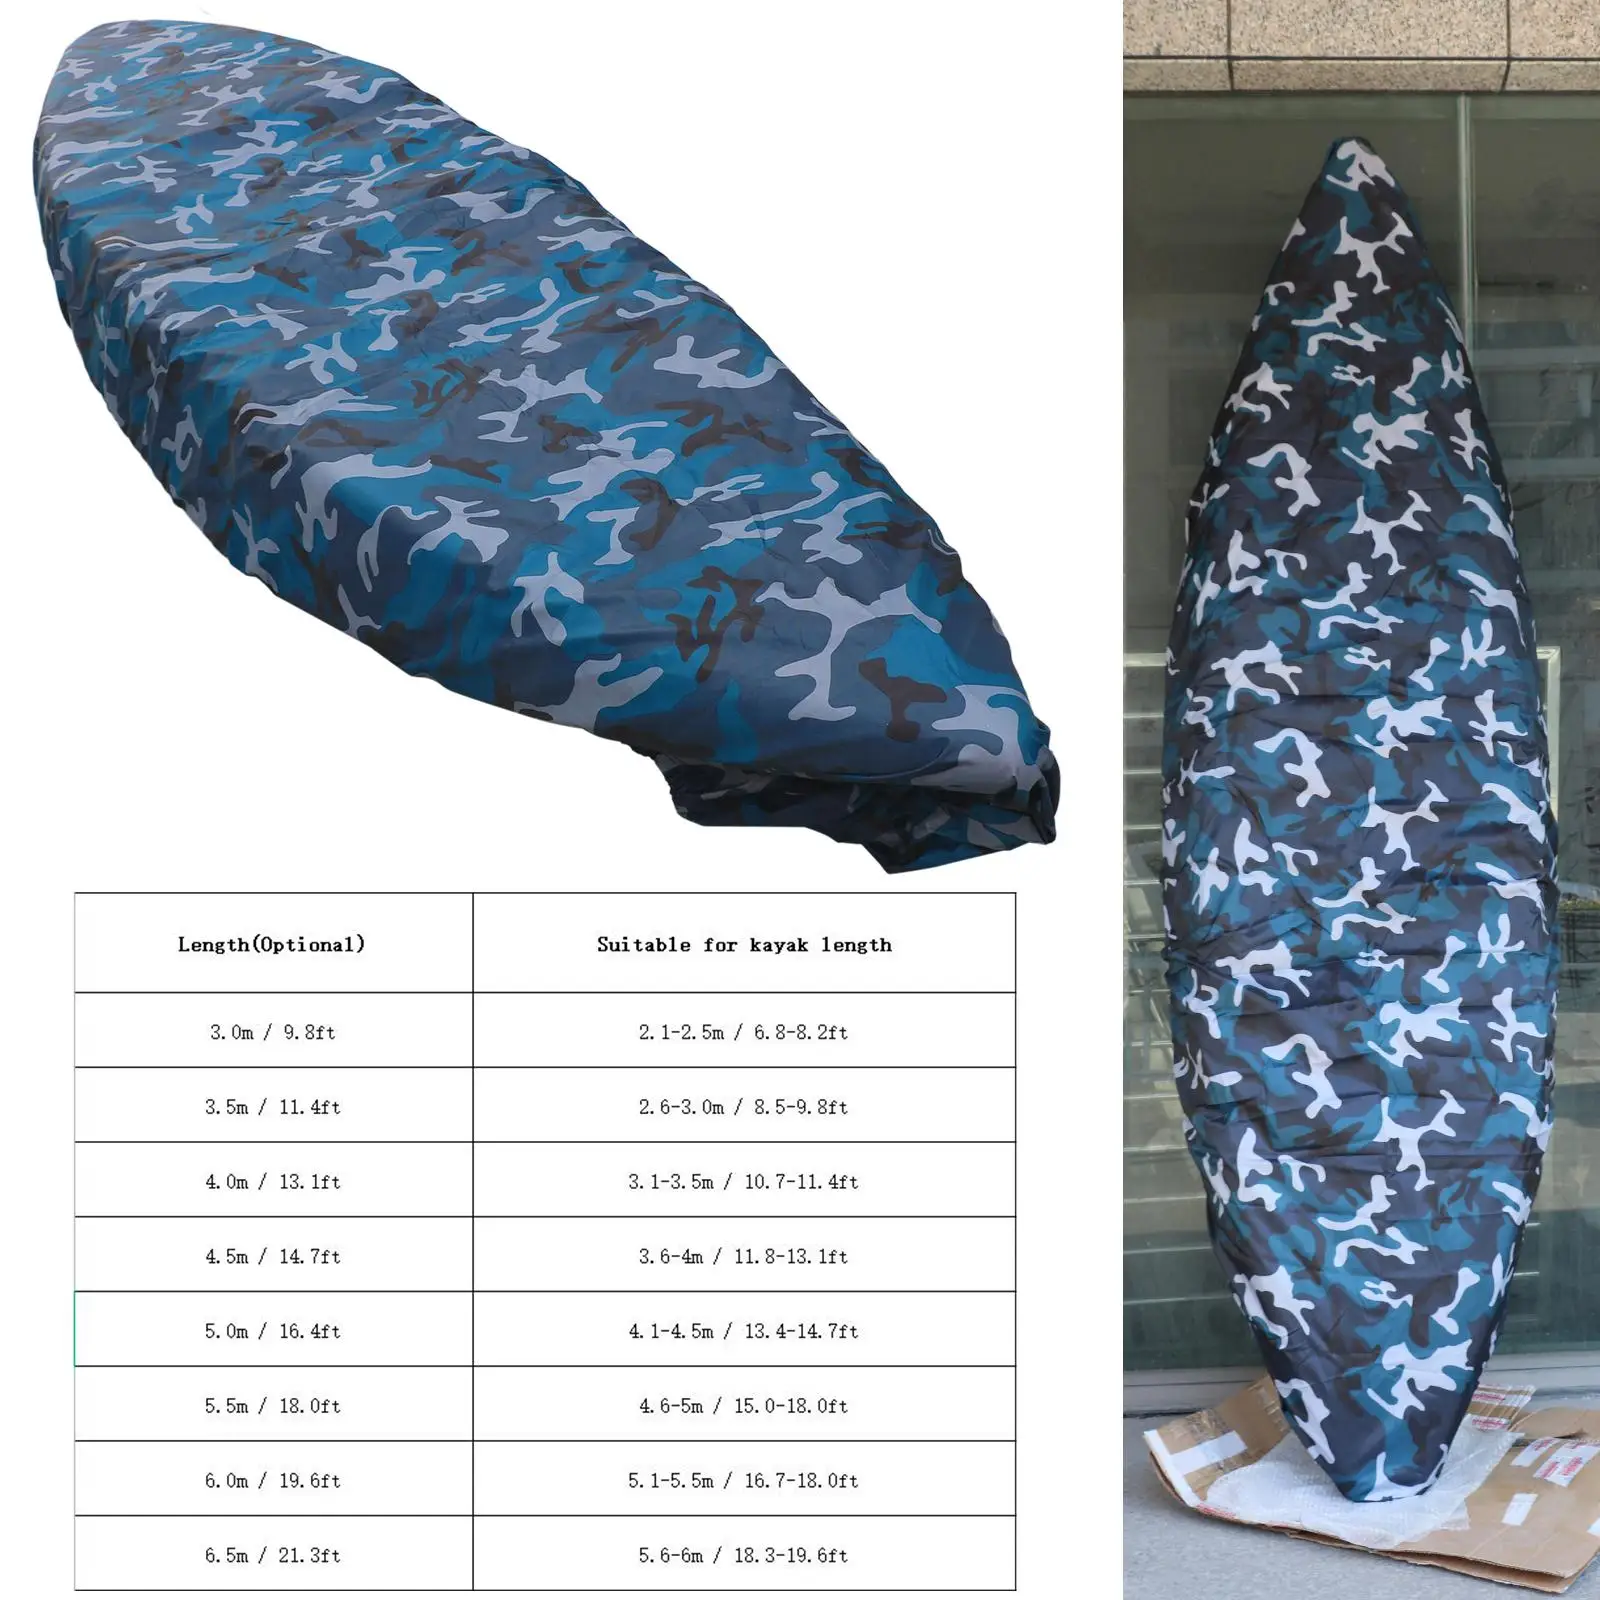 Oxford Fabric Kayak Cover Boat Paddle Board Cover Outdoor Storage Shield